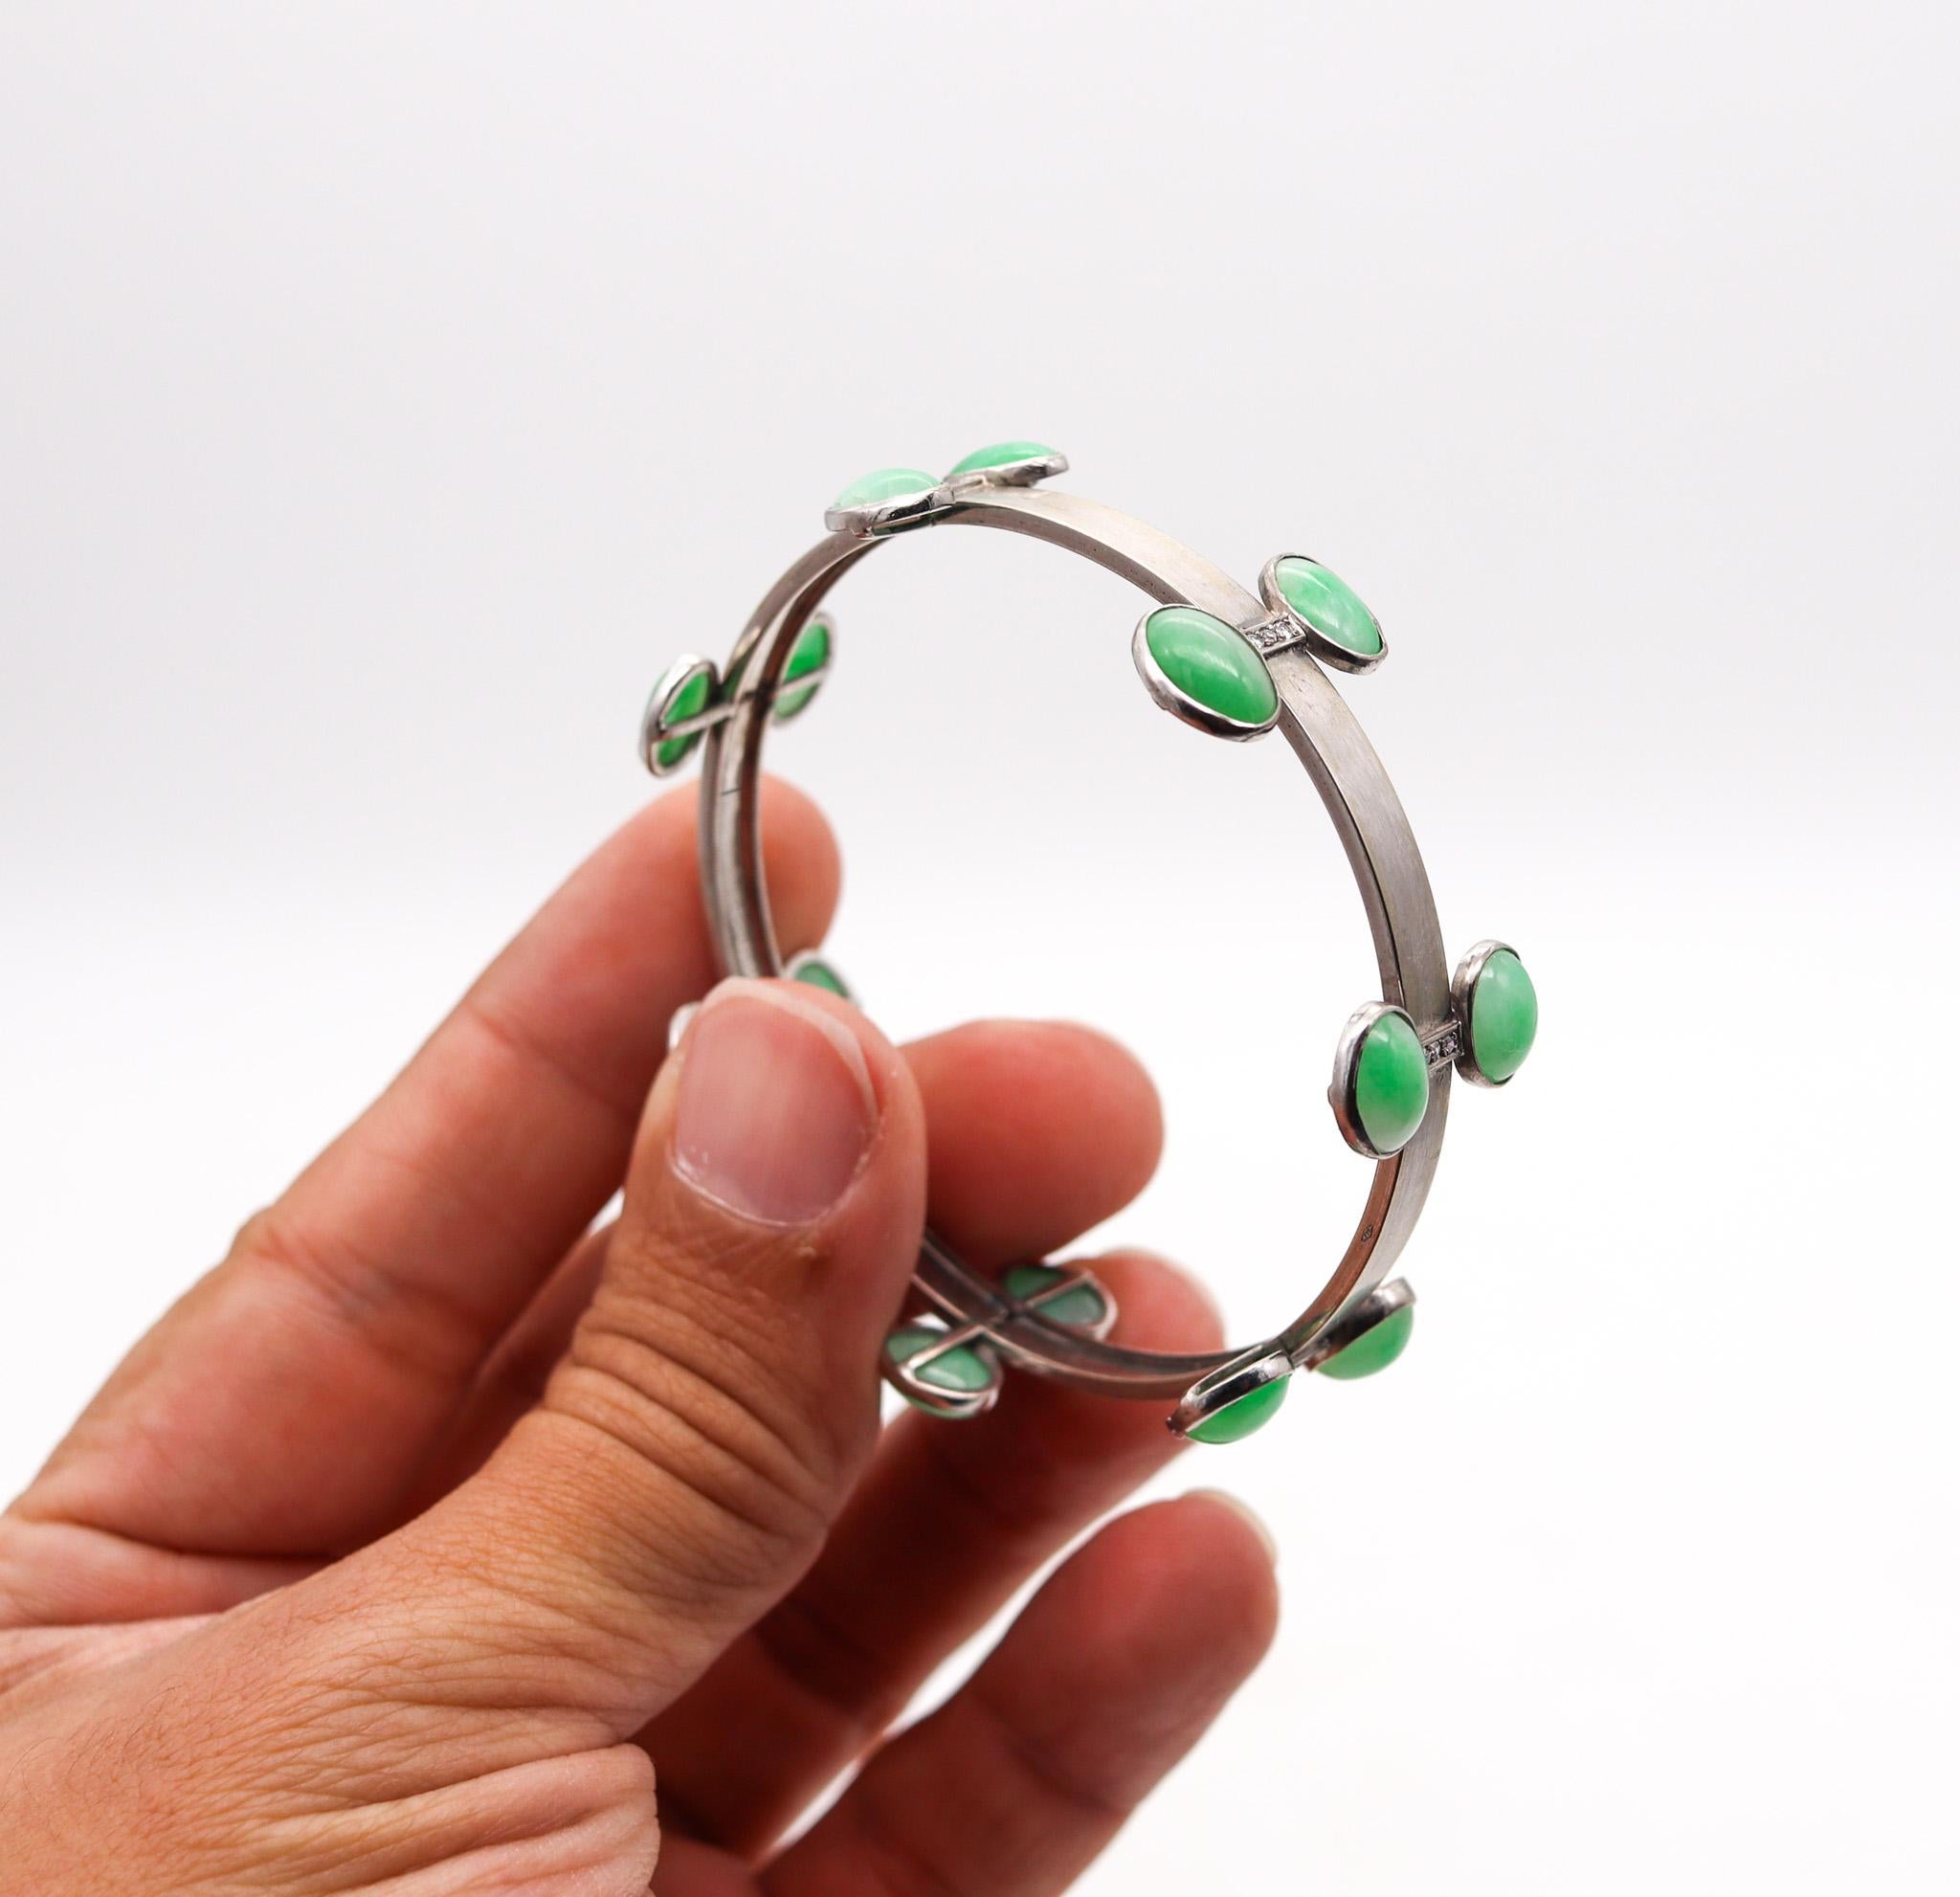 Women's Petochi Bangle Bracelet In 18Kt White Gold With 27.56 Ctw In Diamonds & Jadeite For Sale